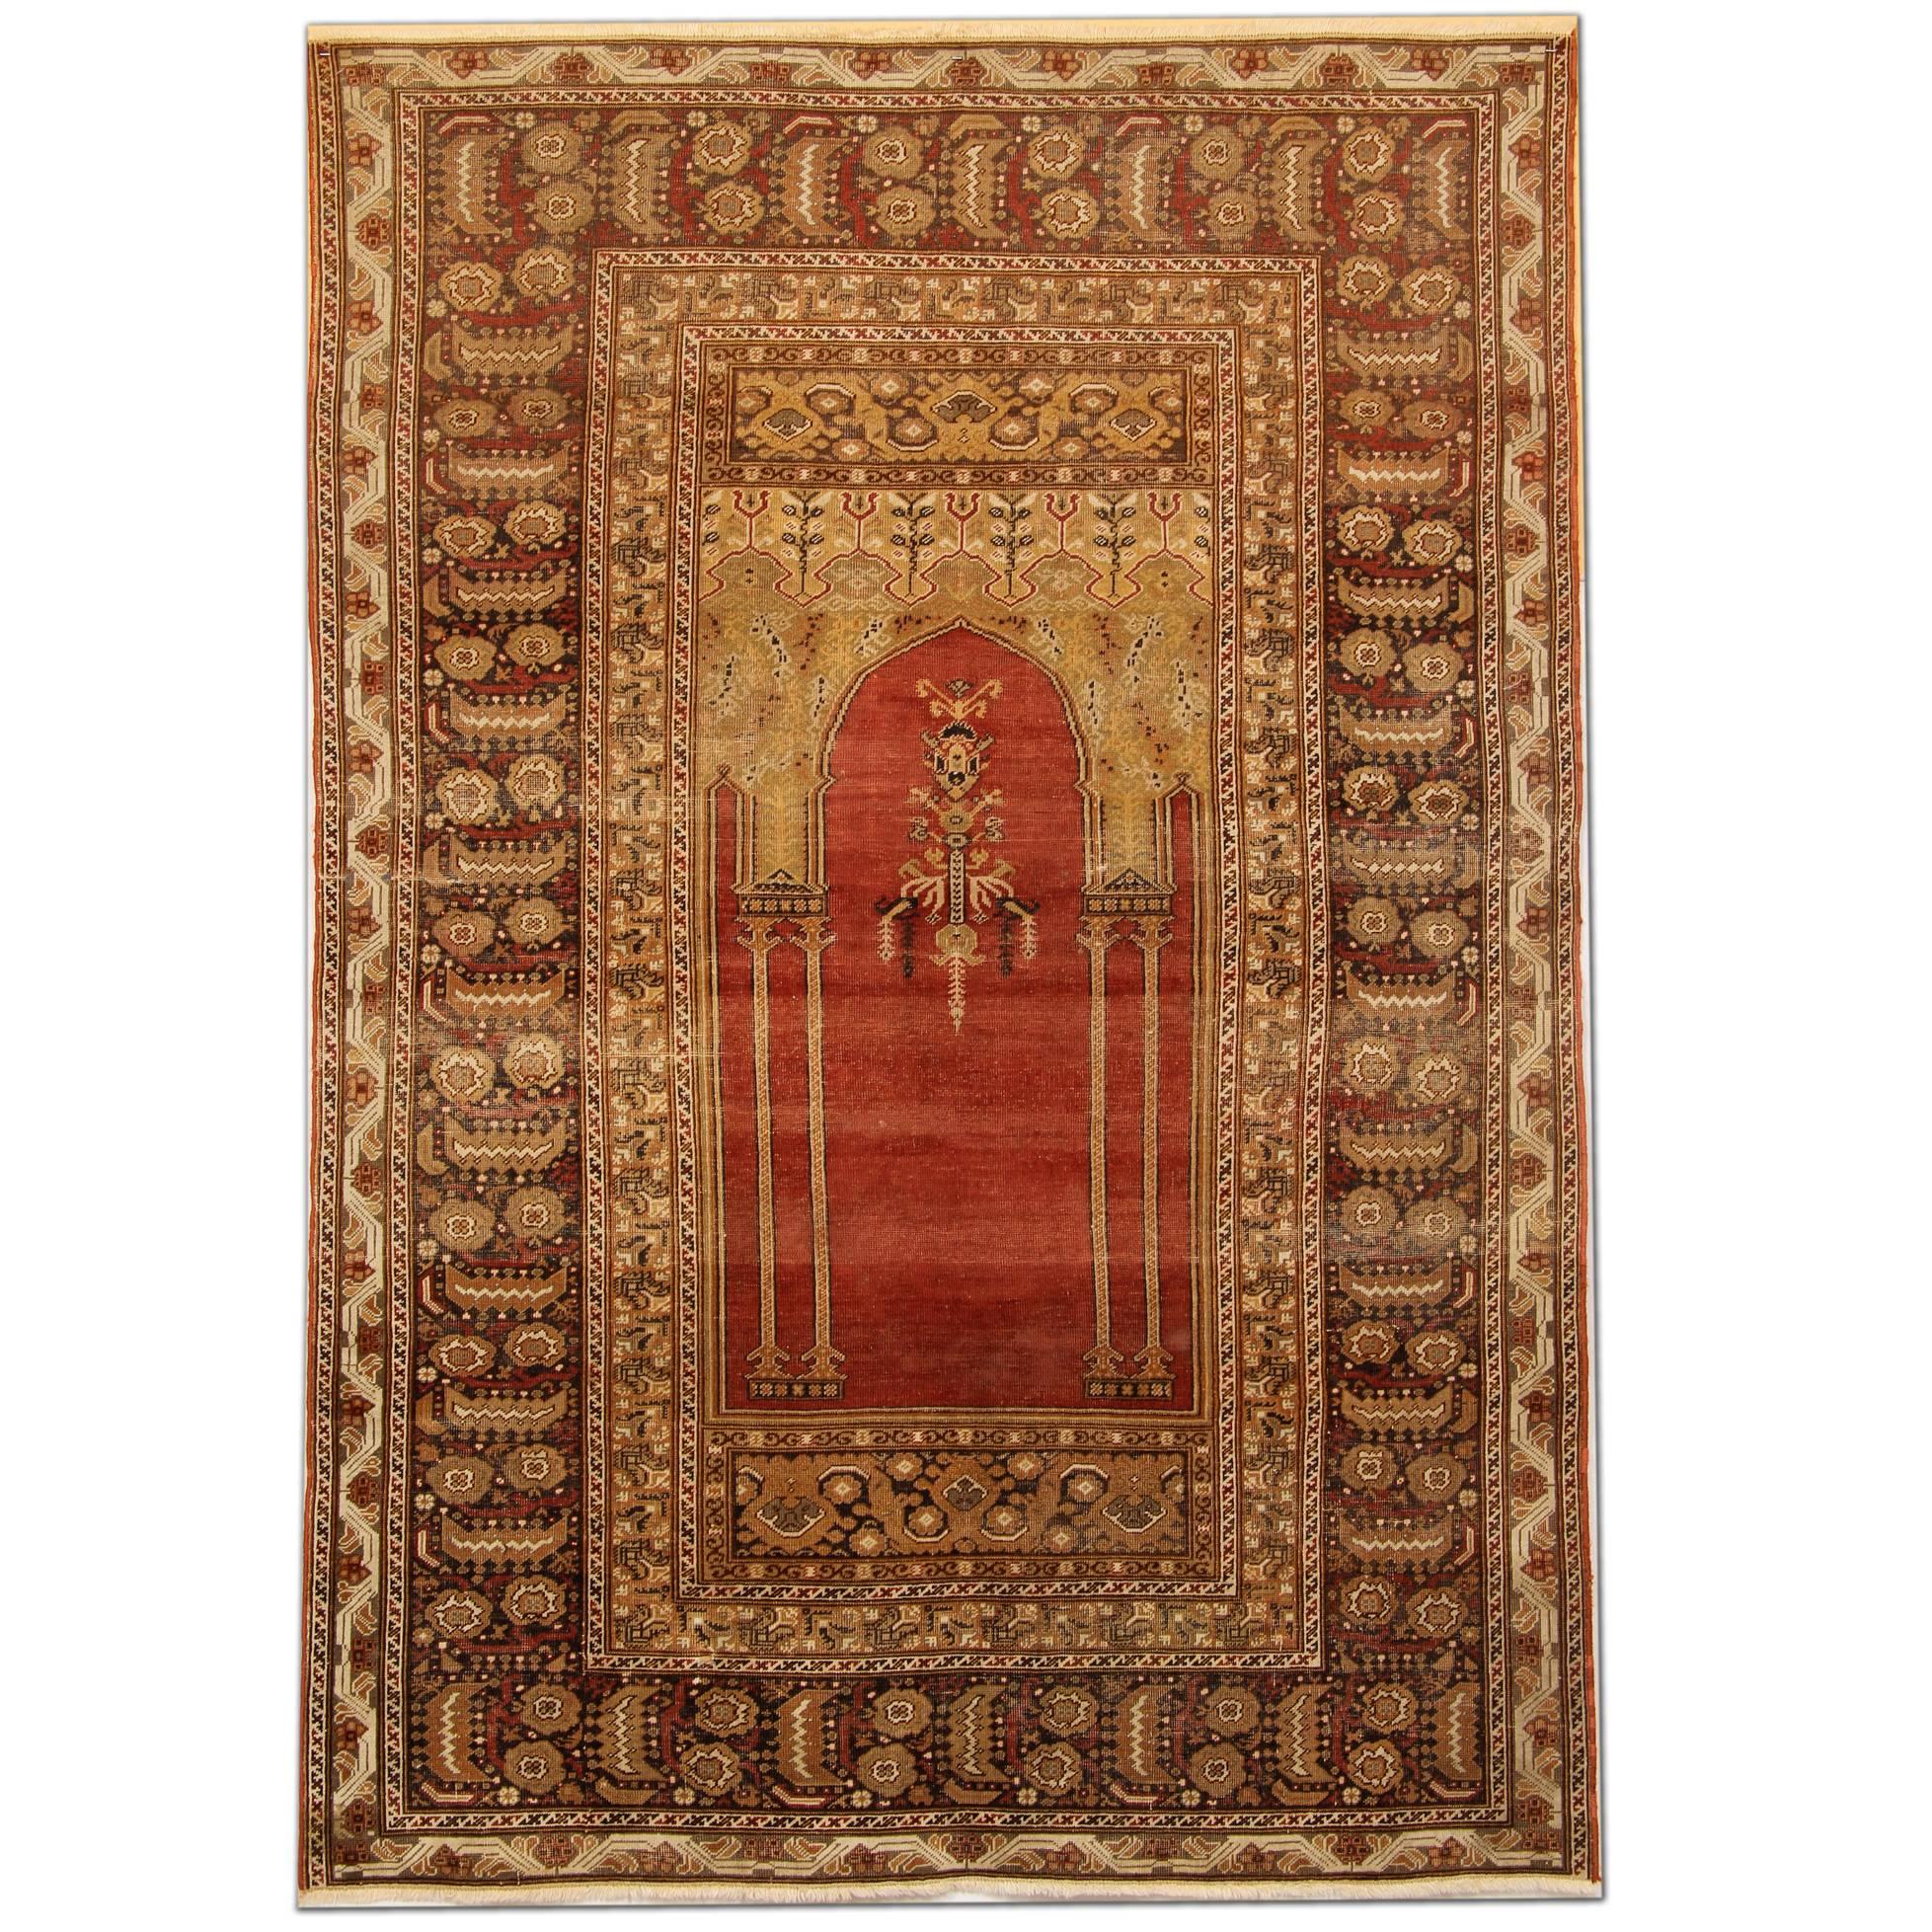 Red Antique Rugs, Traditional Carpet Turkish Rug, Mihrabi Living Room Rug For Sale